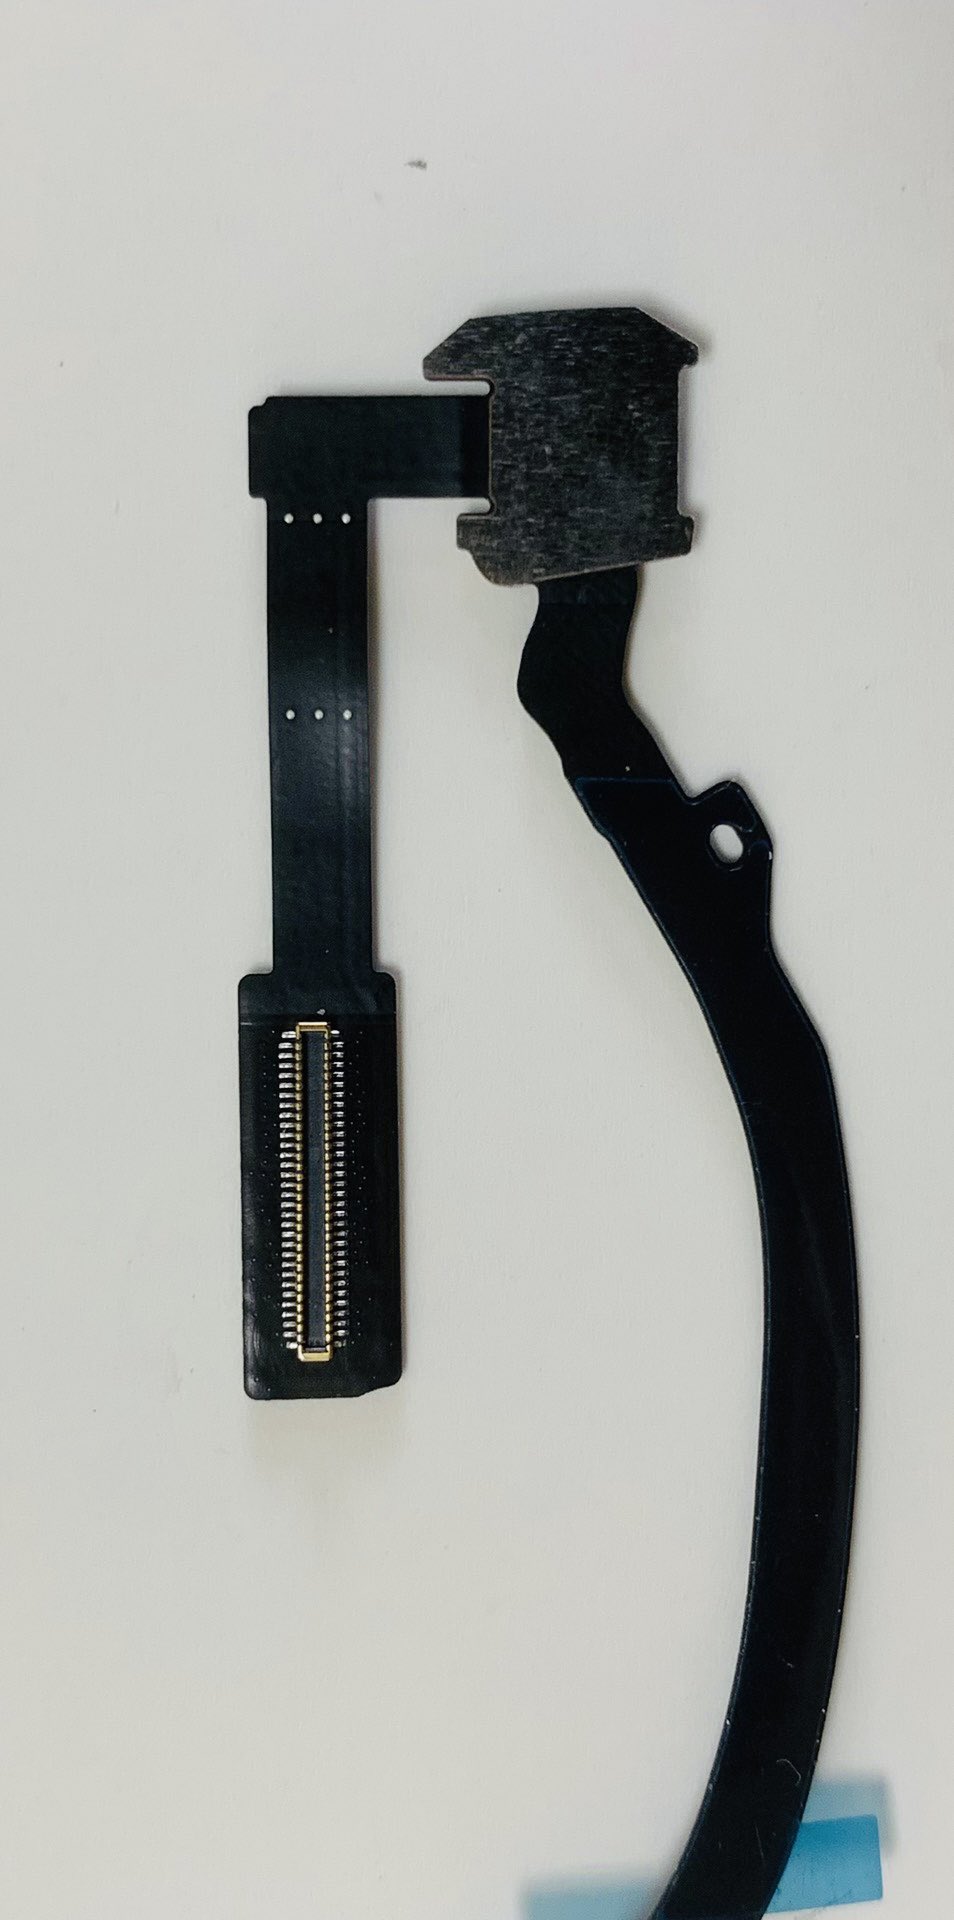 Apple Headset Parts Leaked? [Images]